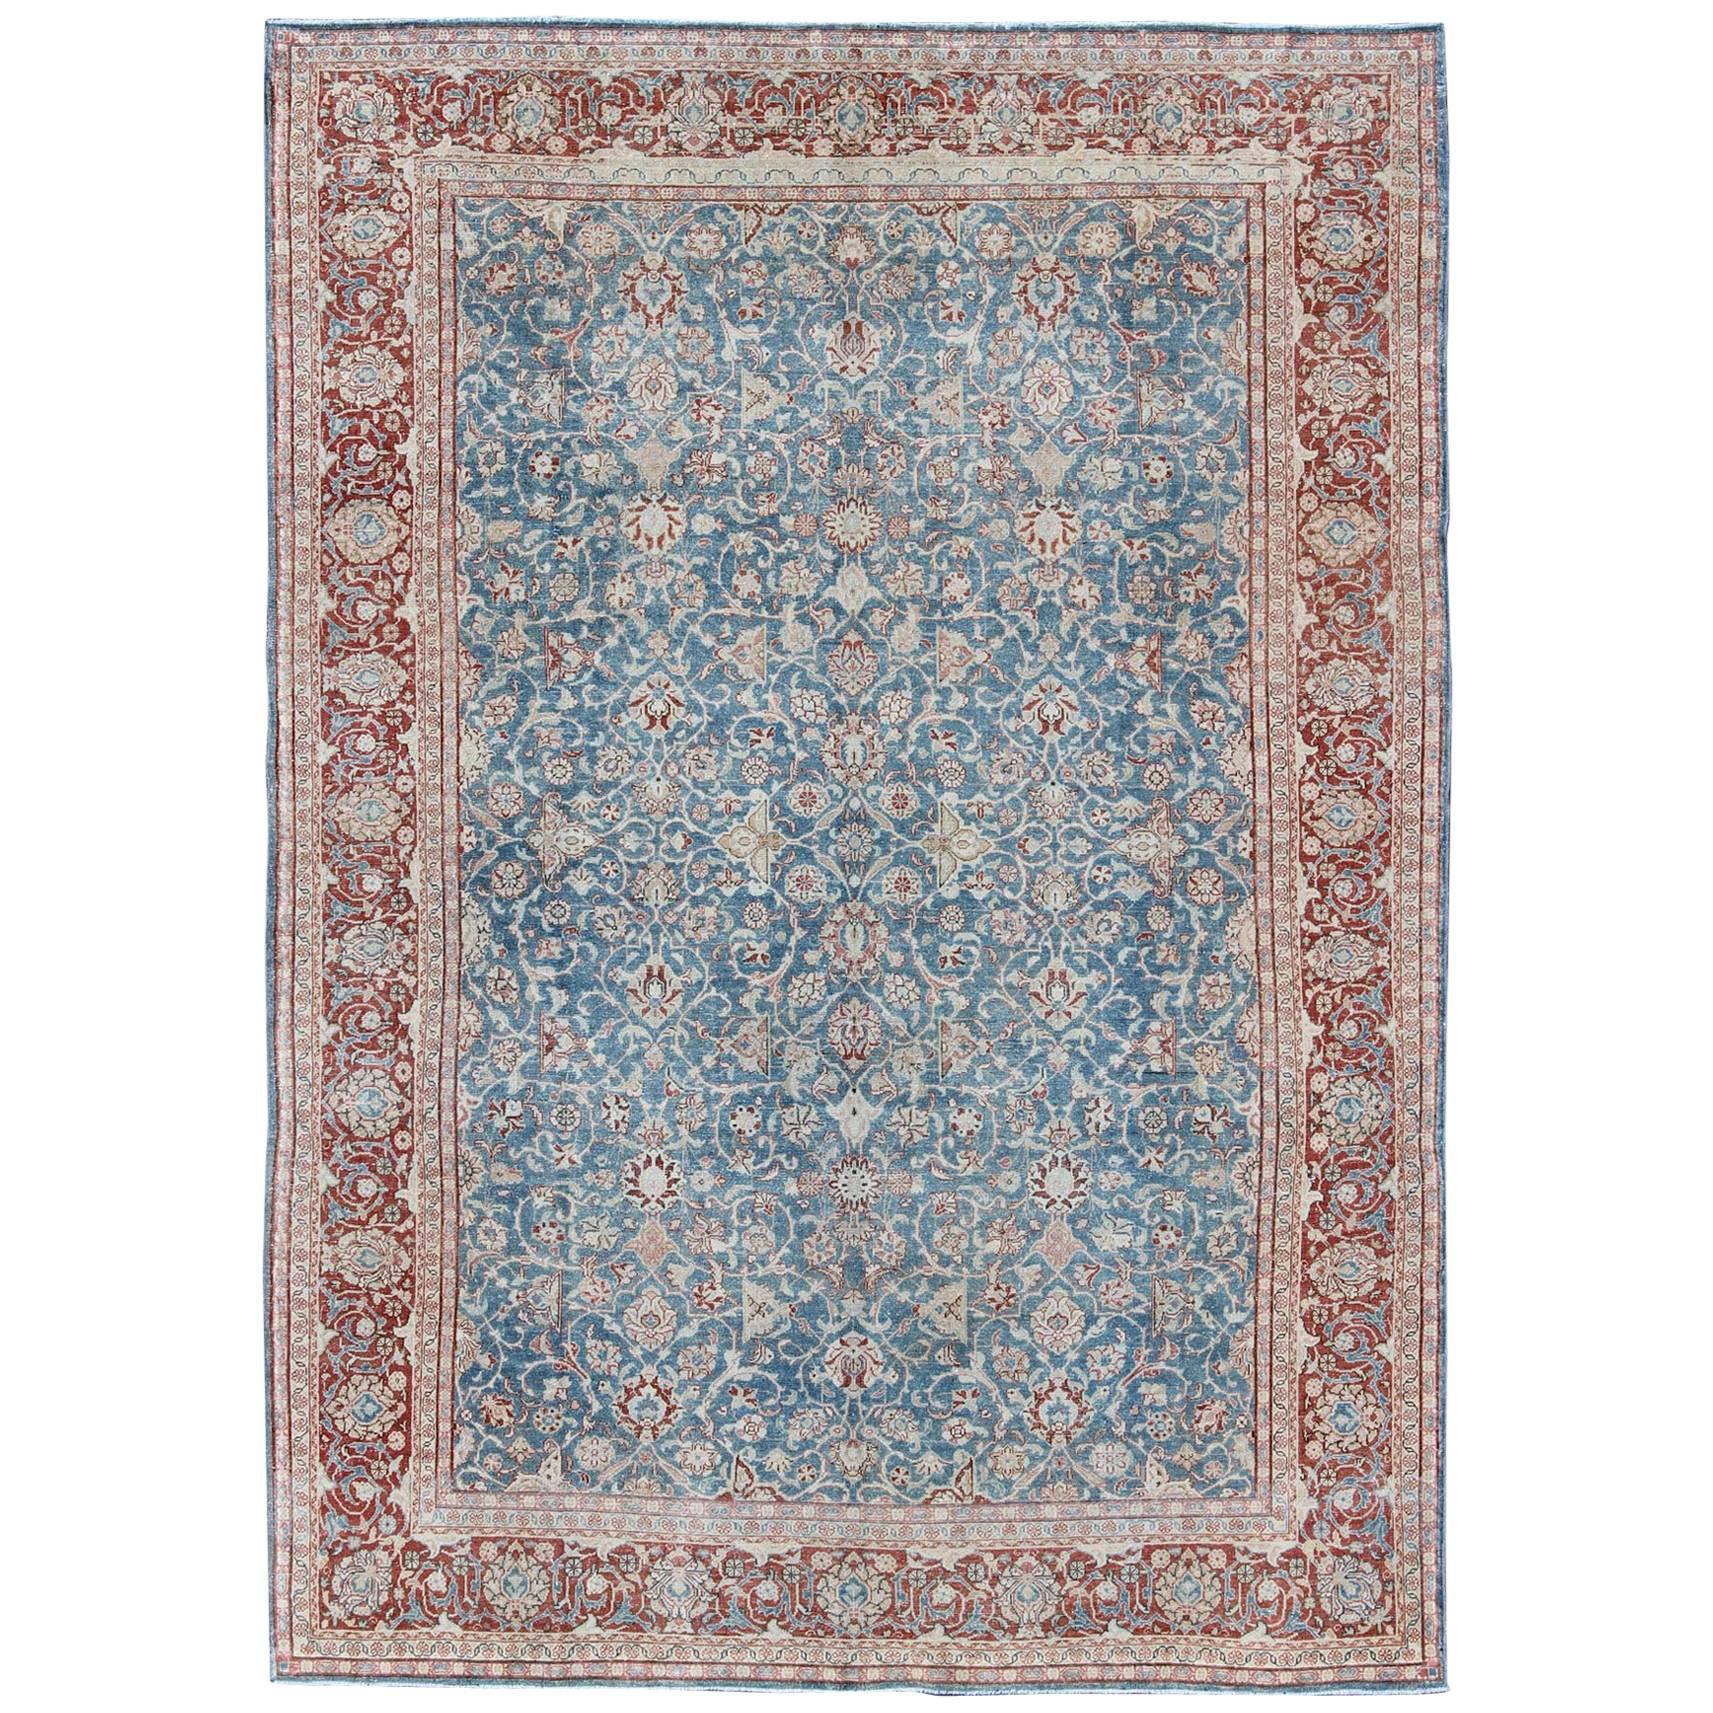 Blue and Red Antique Persian Malayer Rug with All-Over Design and Ornate Borders For Sale